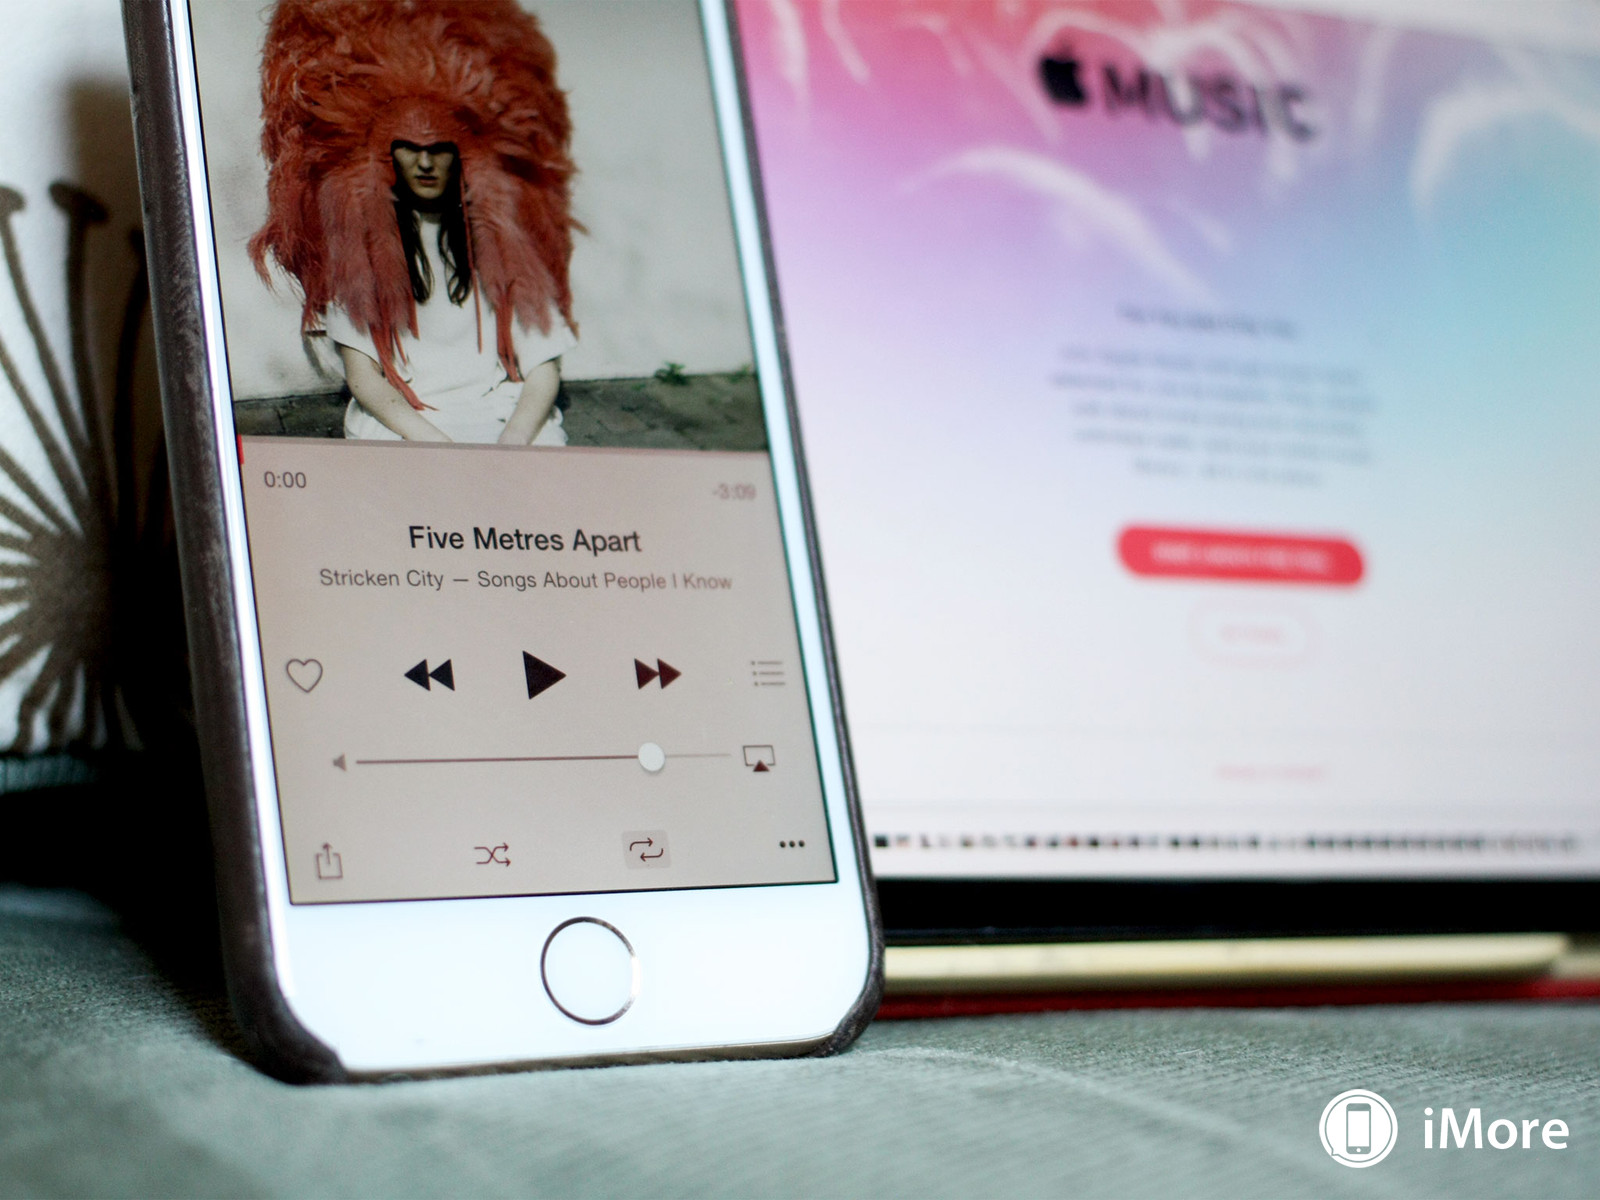 Okay, heres the deal with Apple Music, iCloud Music Library, and other